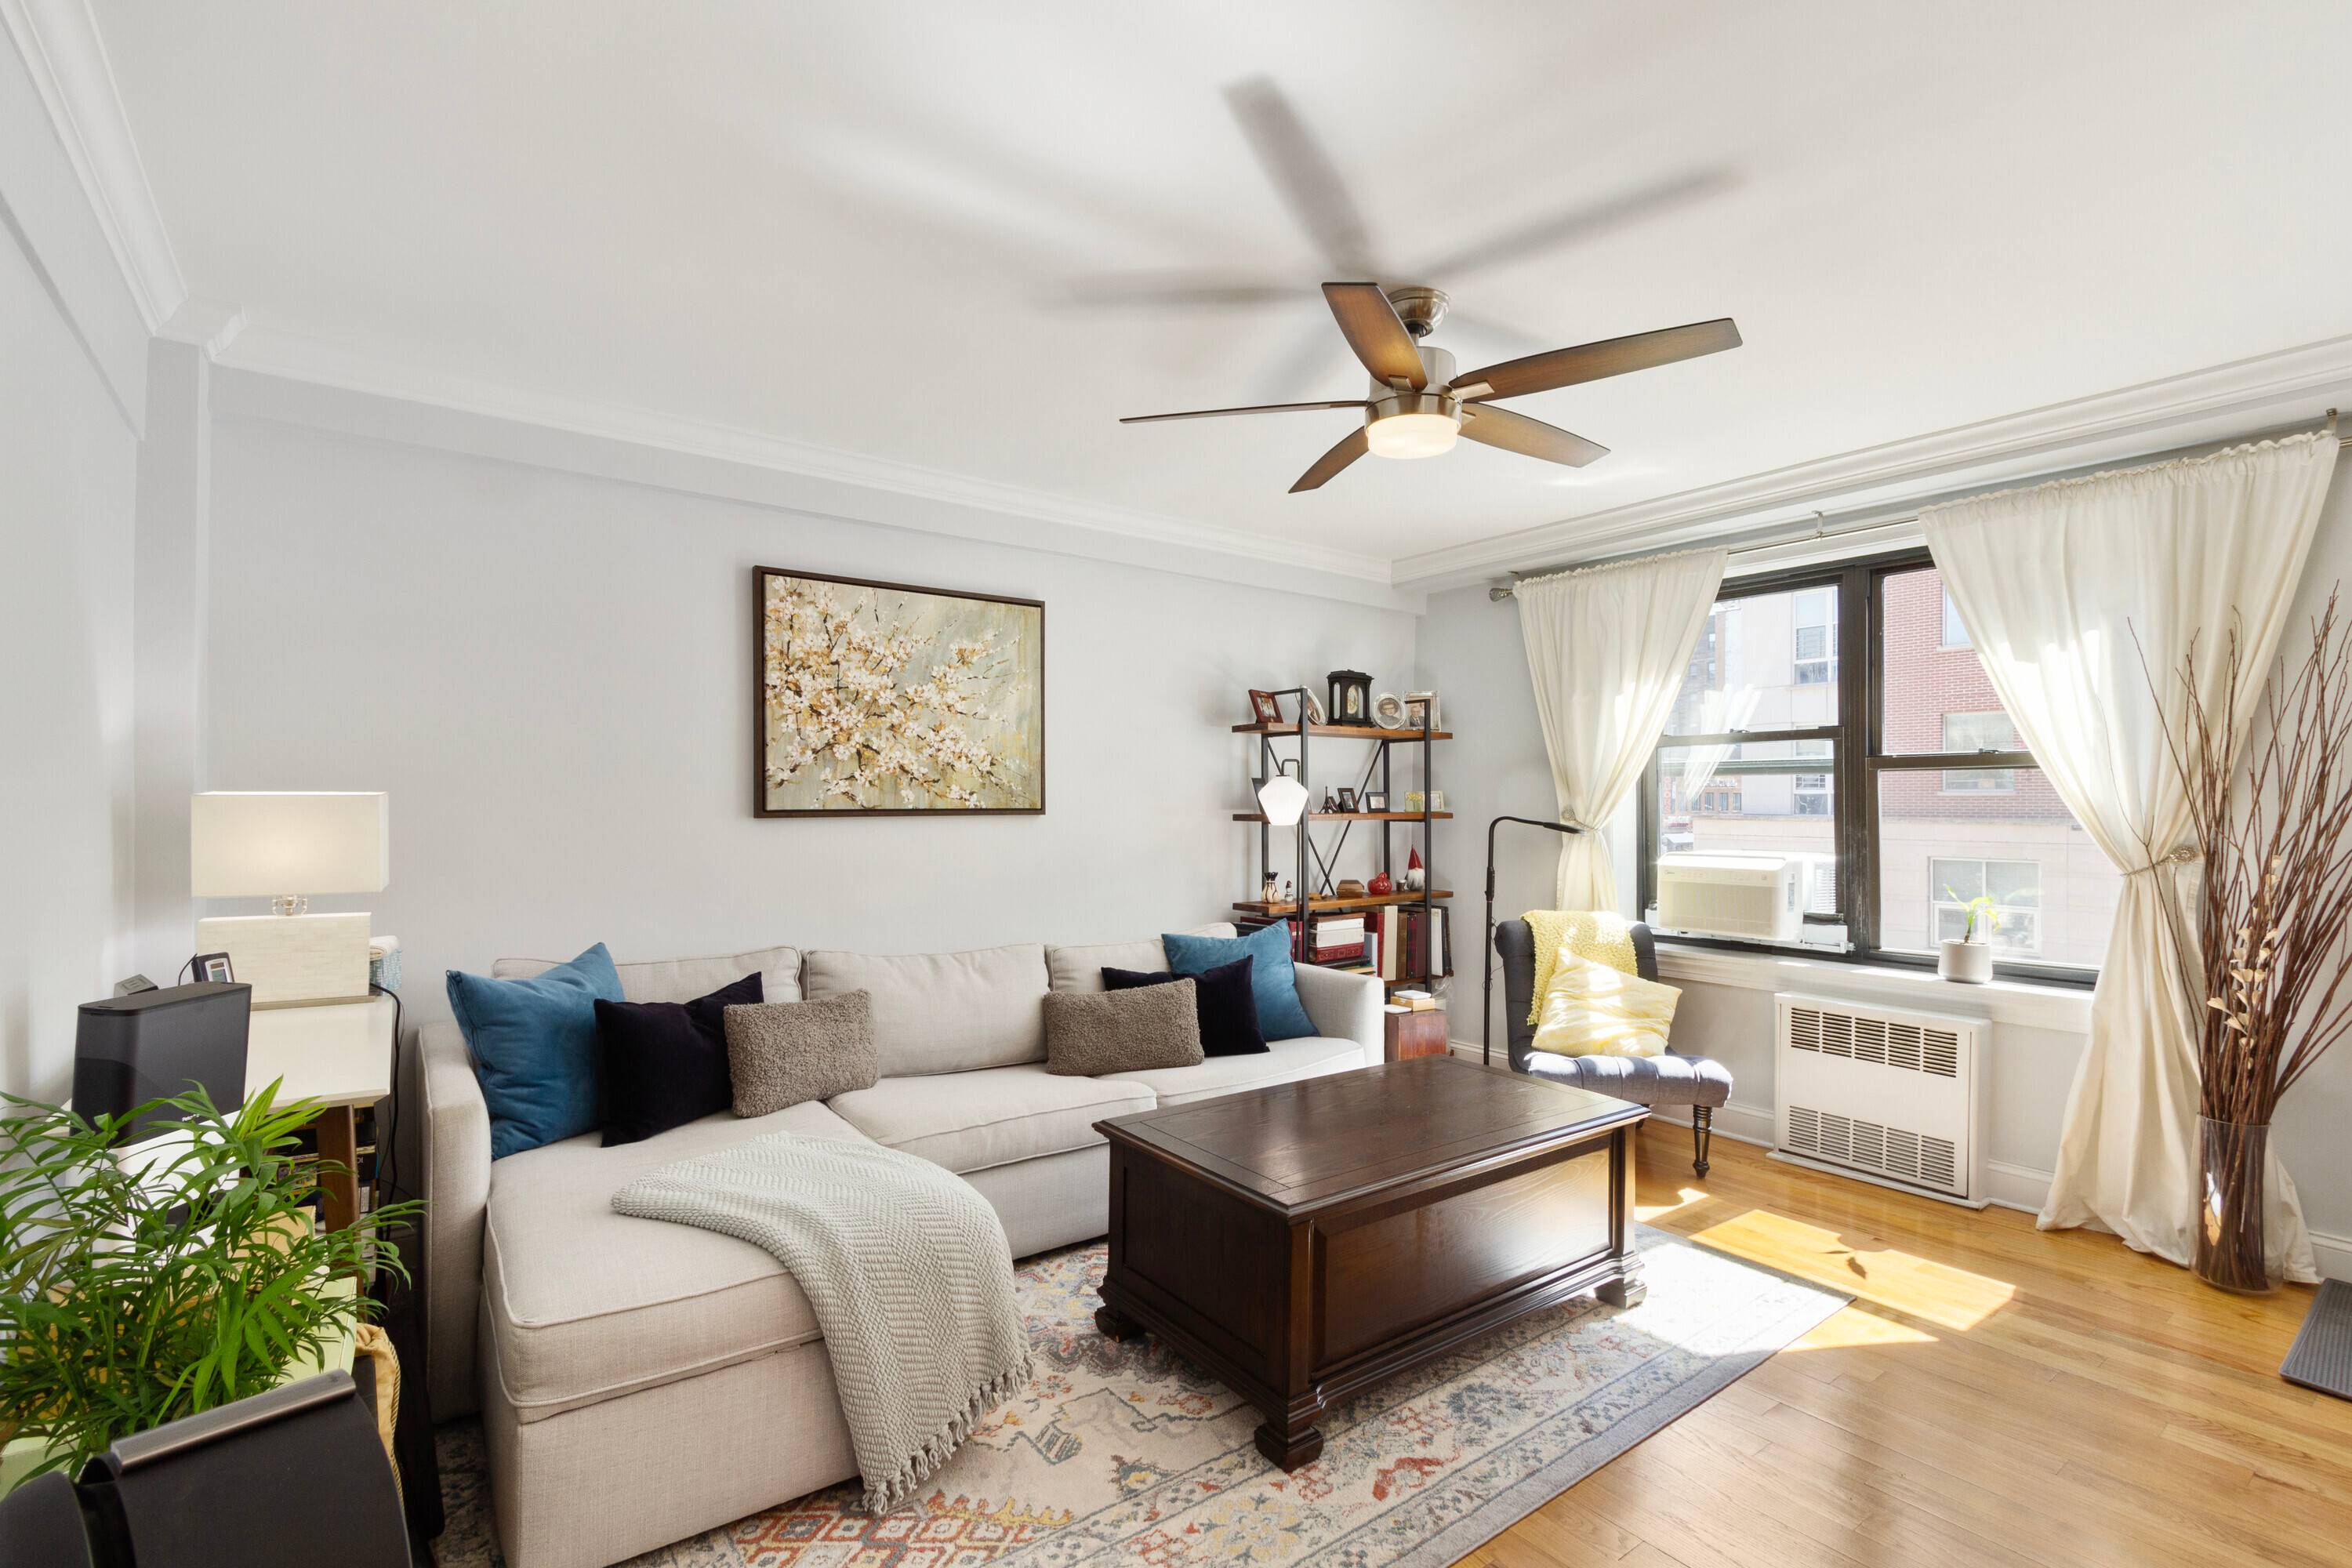 Southern exposure brings cheerful sunshine into this comfortable home that boasts one of the largest one bedroom floor plans in the building.